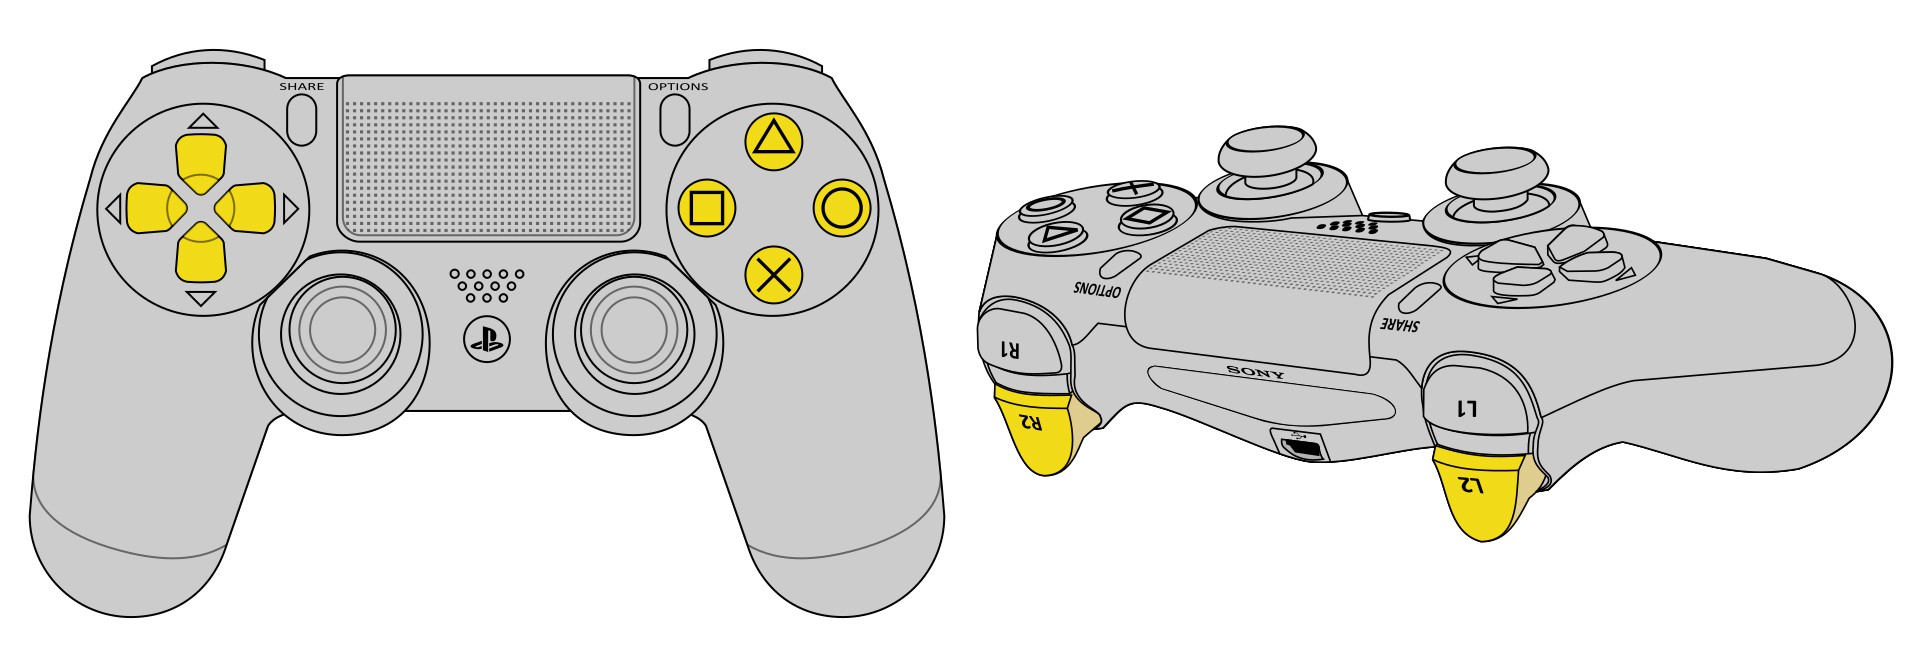 Schematic image showing the Playstation 4 controller, with the 10 relevant buttons highlighted